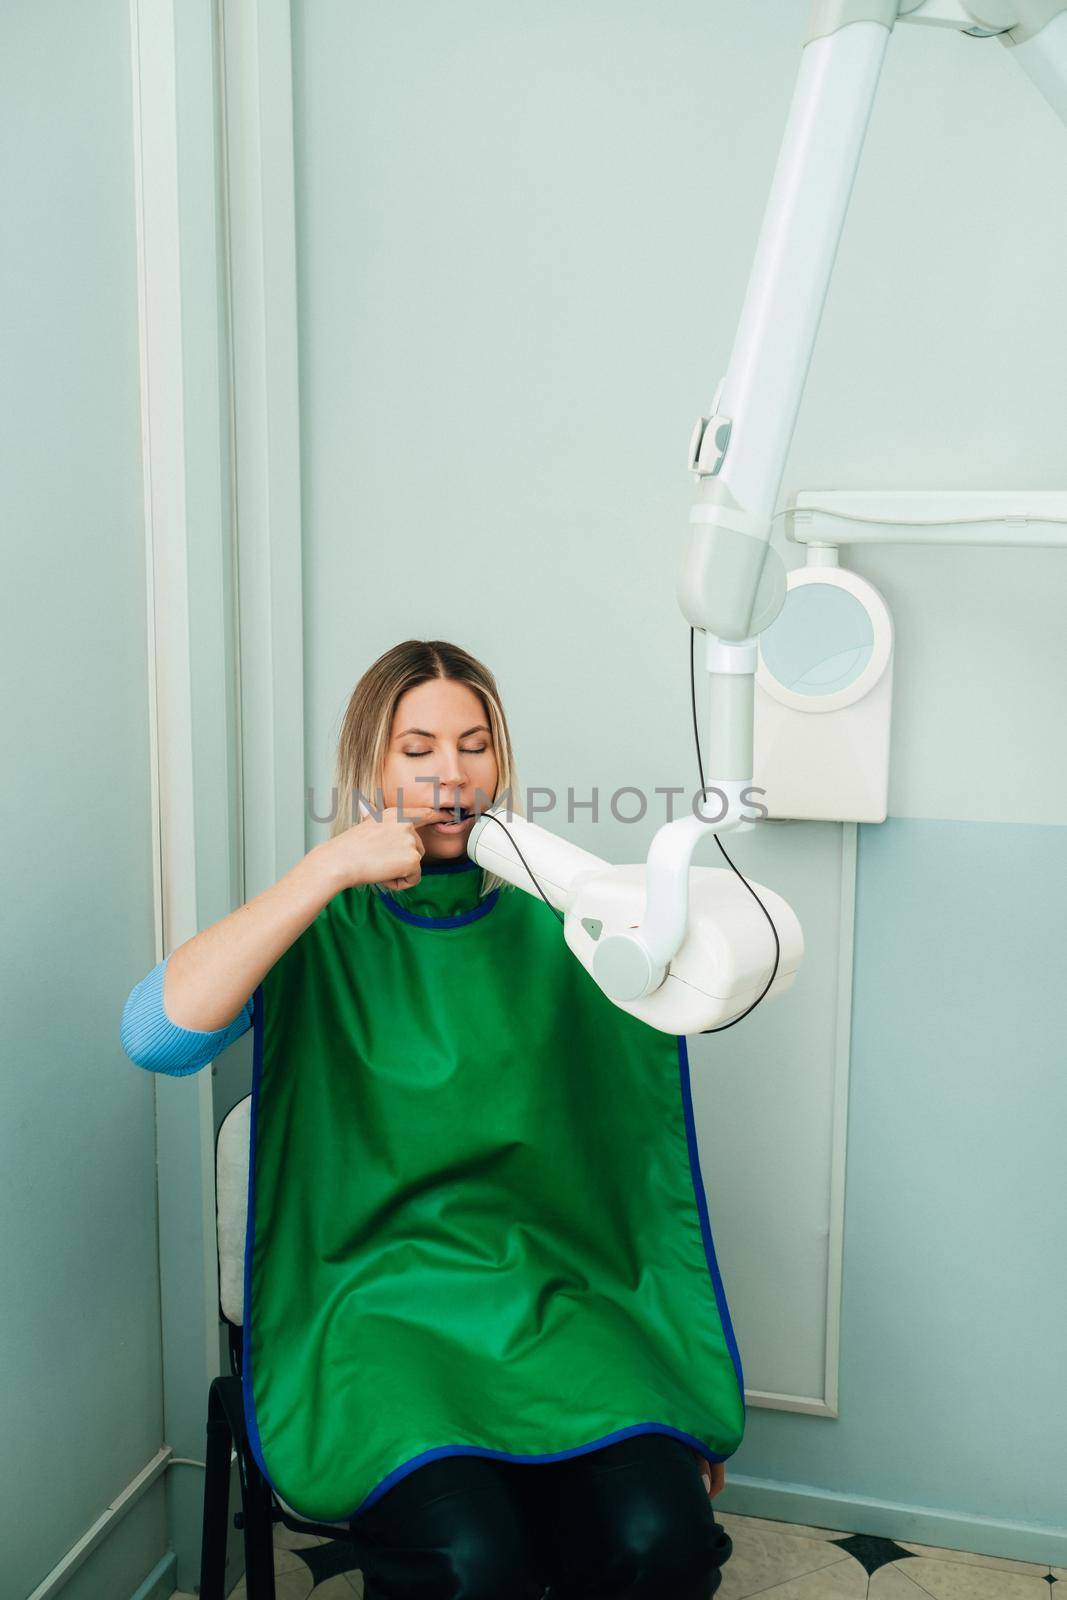 They take a picture of the girl in the X-ray dental office in the hospital.